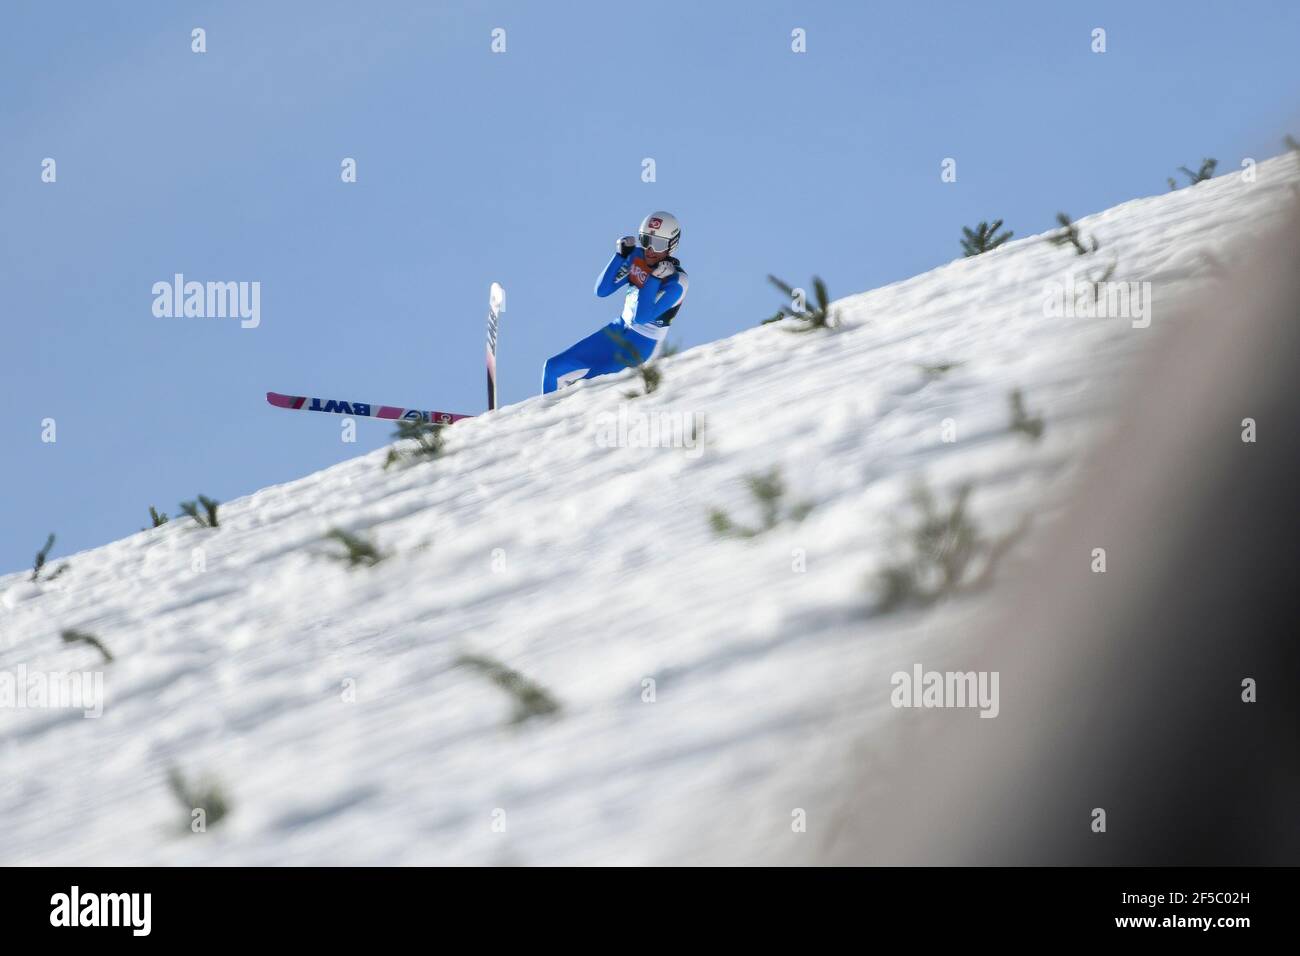 Daniel Andre Tande of Norway crashes during the FIS Ski Jumping World Cup Flying Hill Individual competition in Planica. Stock Photo